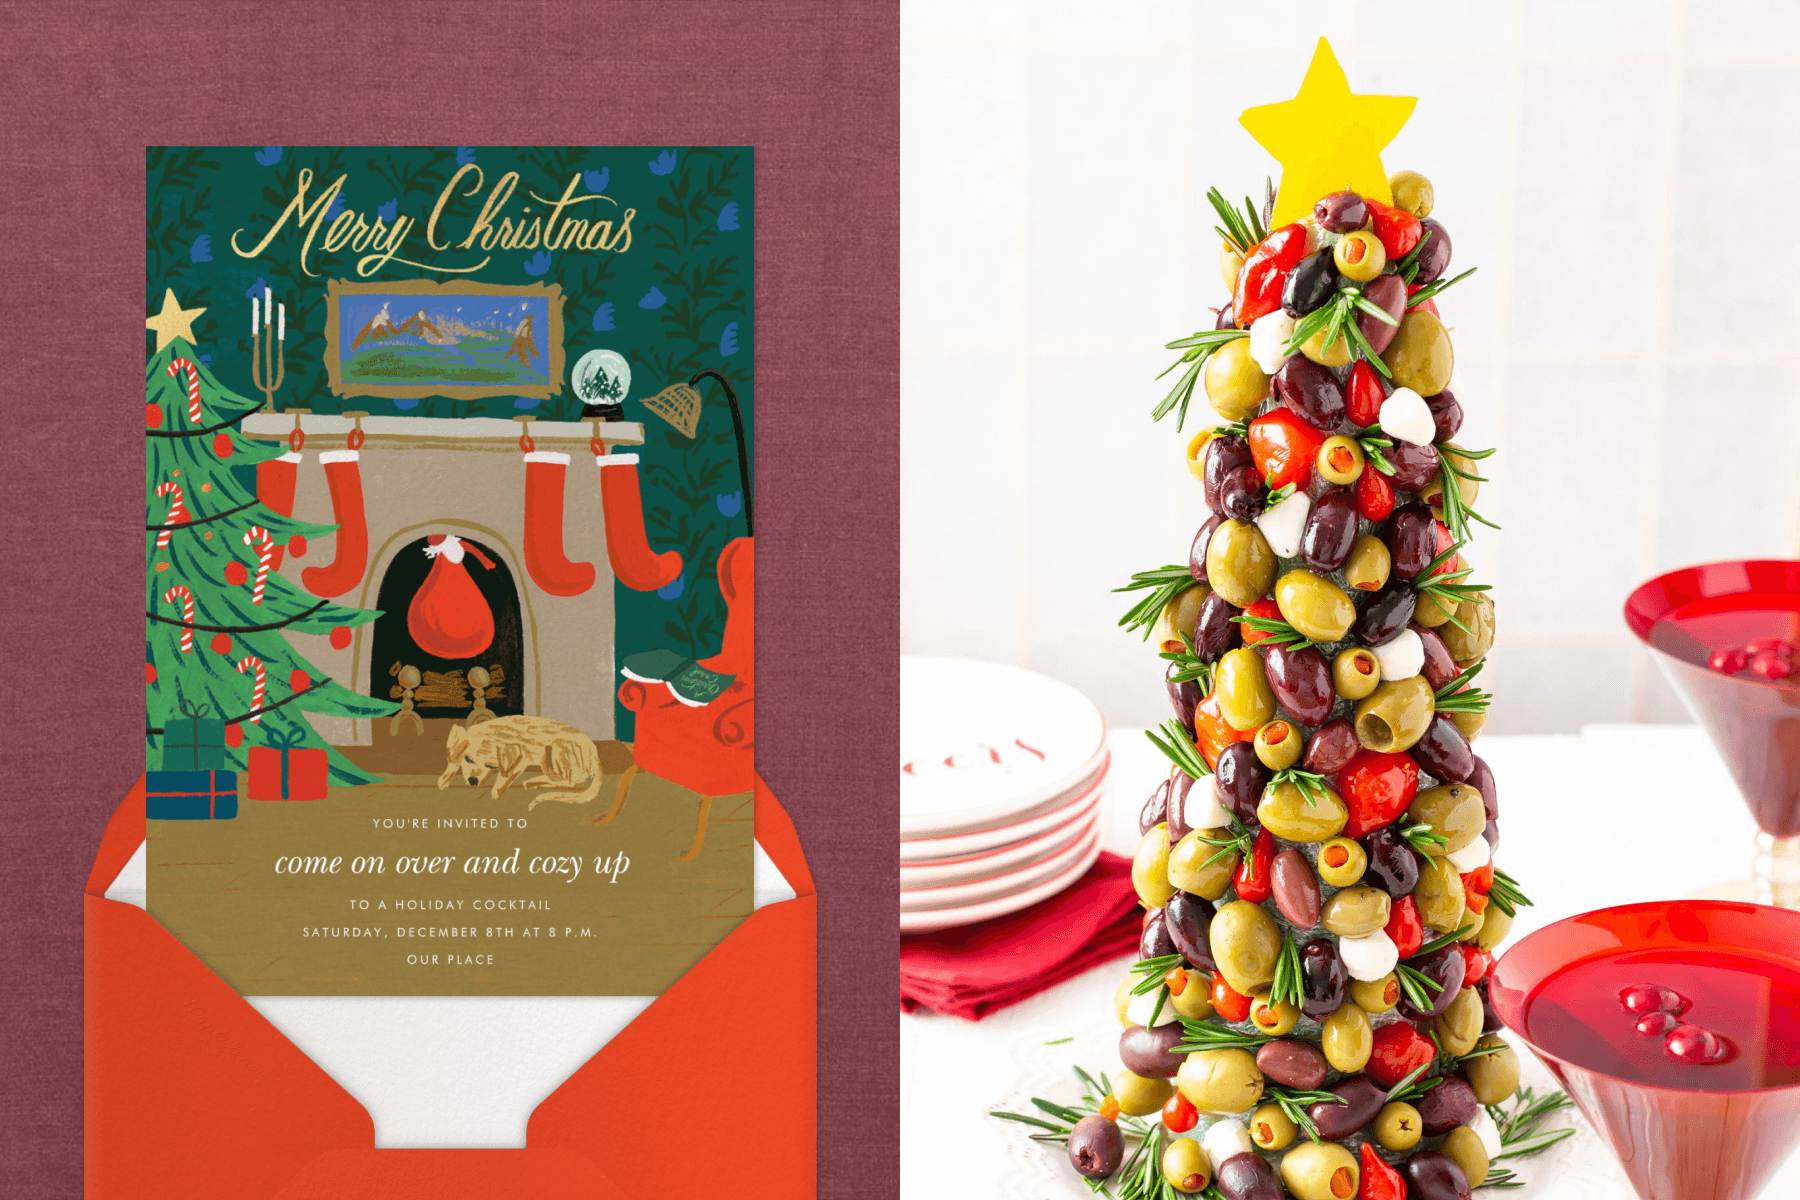 A card with an illustration of a dog and Christmas tree in front of a fire place; a “Christmas tree” made of various colors of olives.